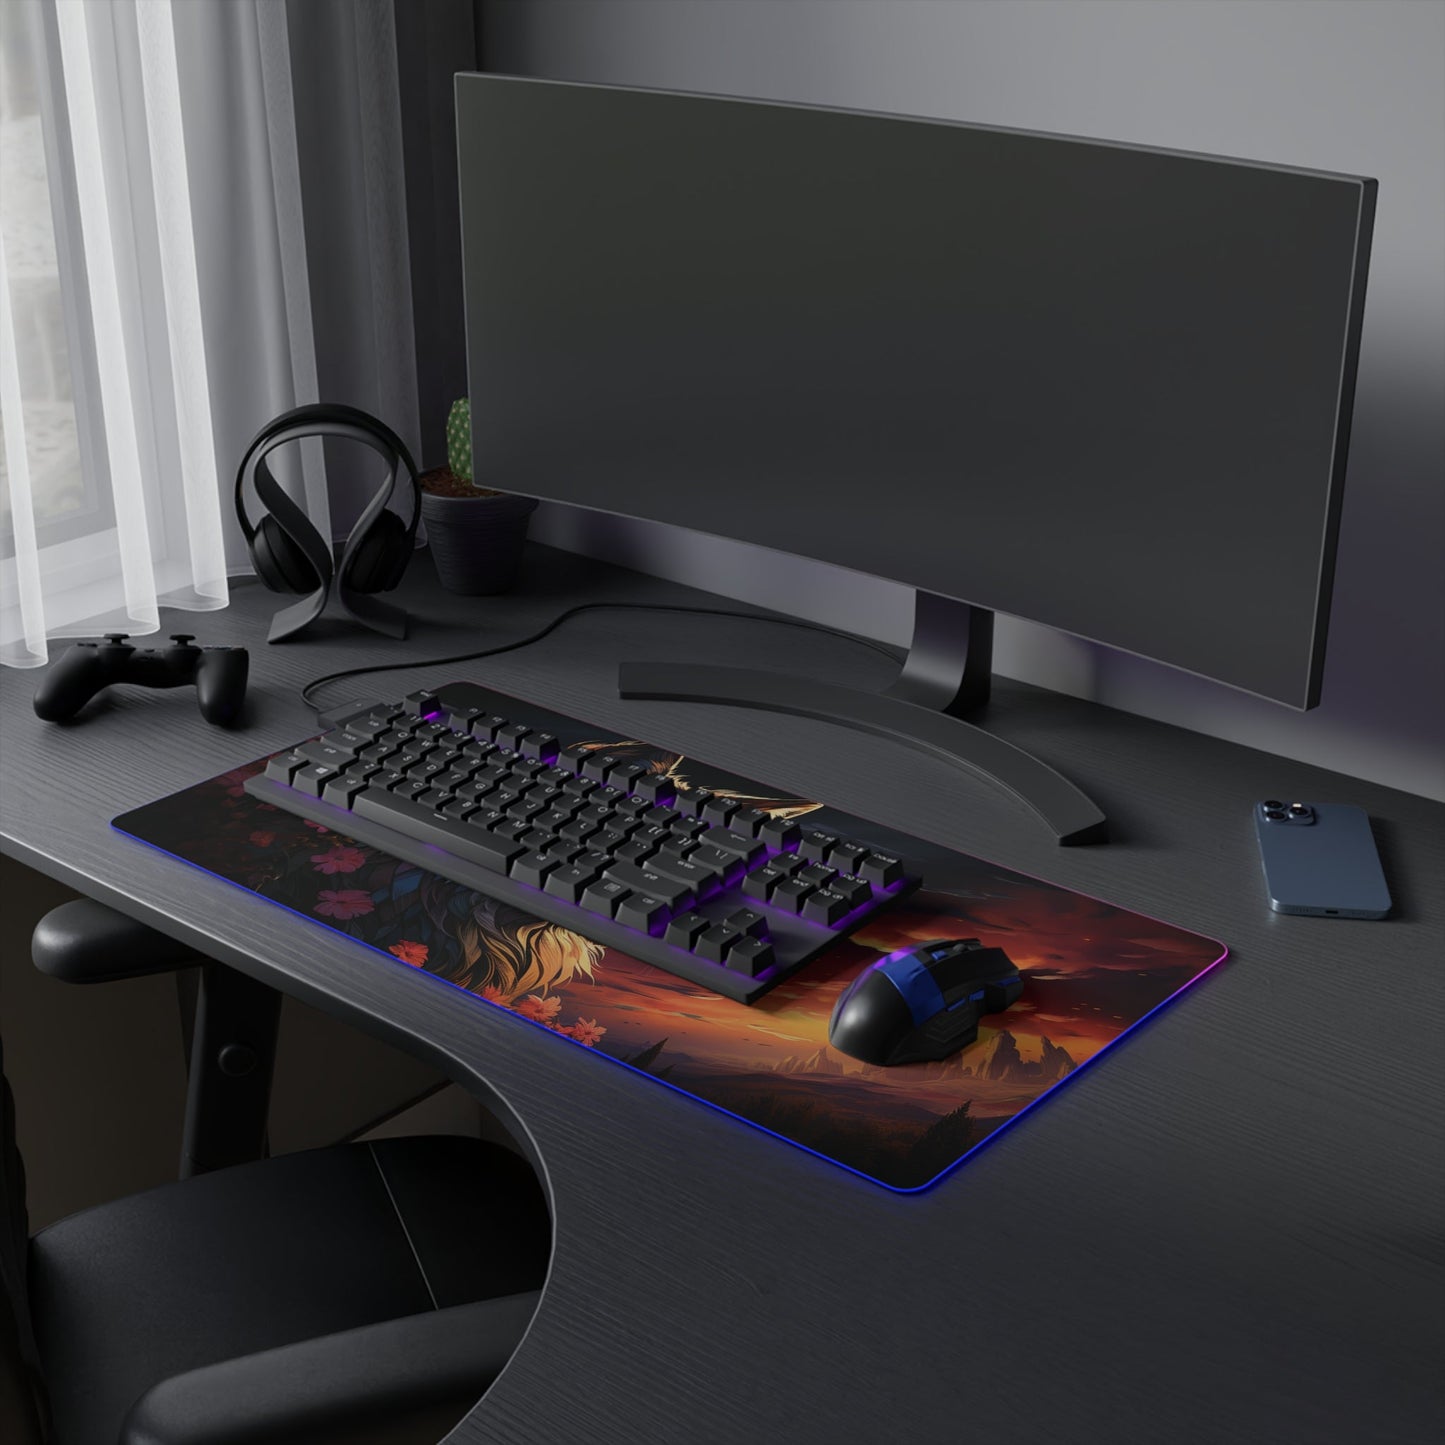 21 Neduz Dawn Wolf LED Gaming Mouse Pad with 14 Different